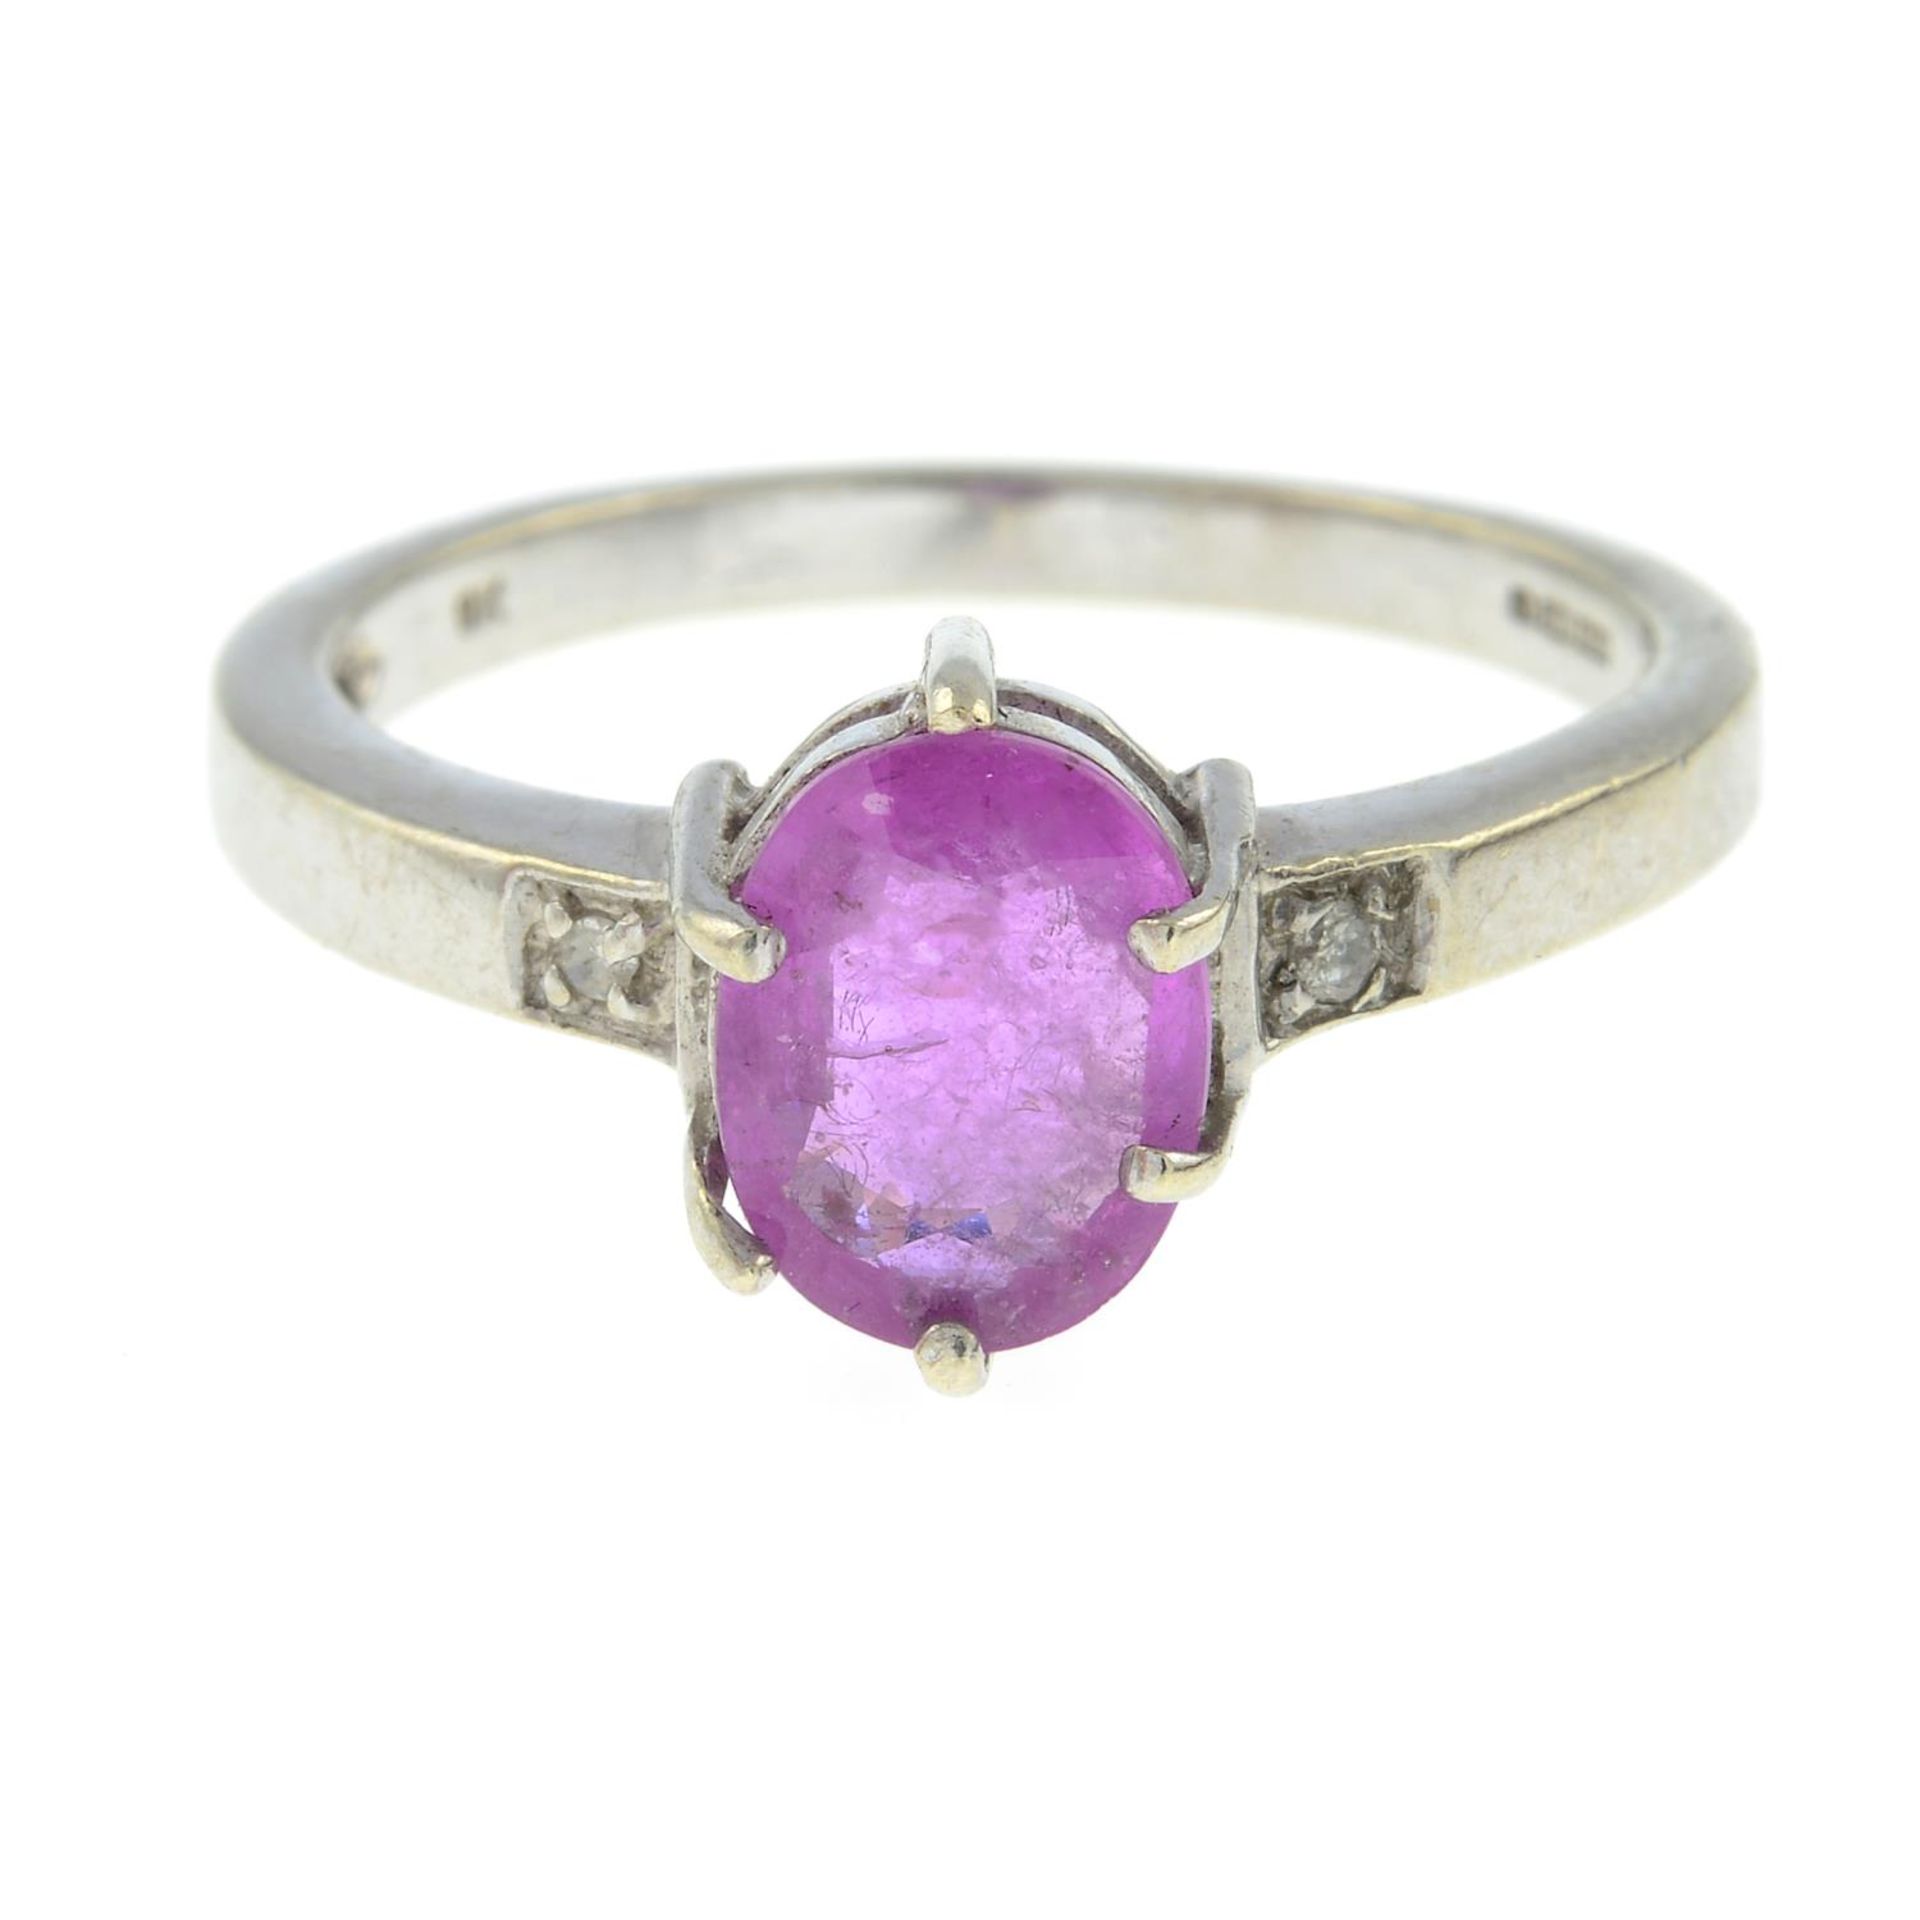 A 9ct gold pink sapphire and diamond ring.Hallmarks for 9ct gold.